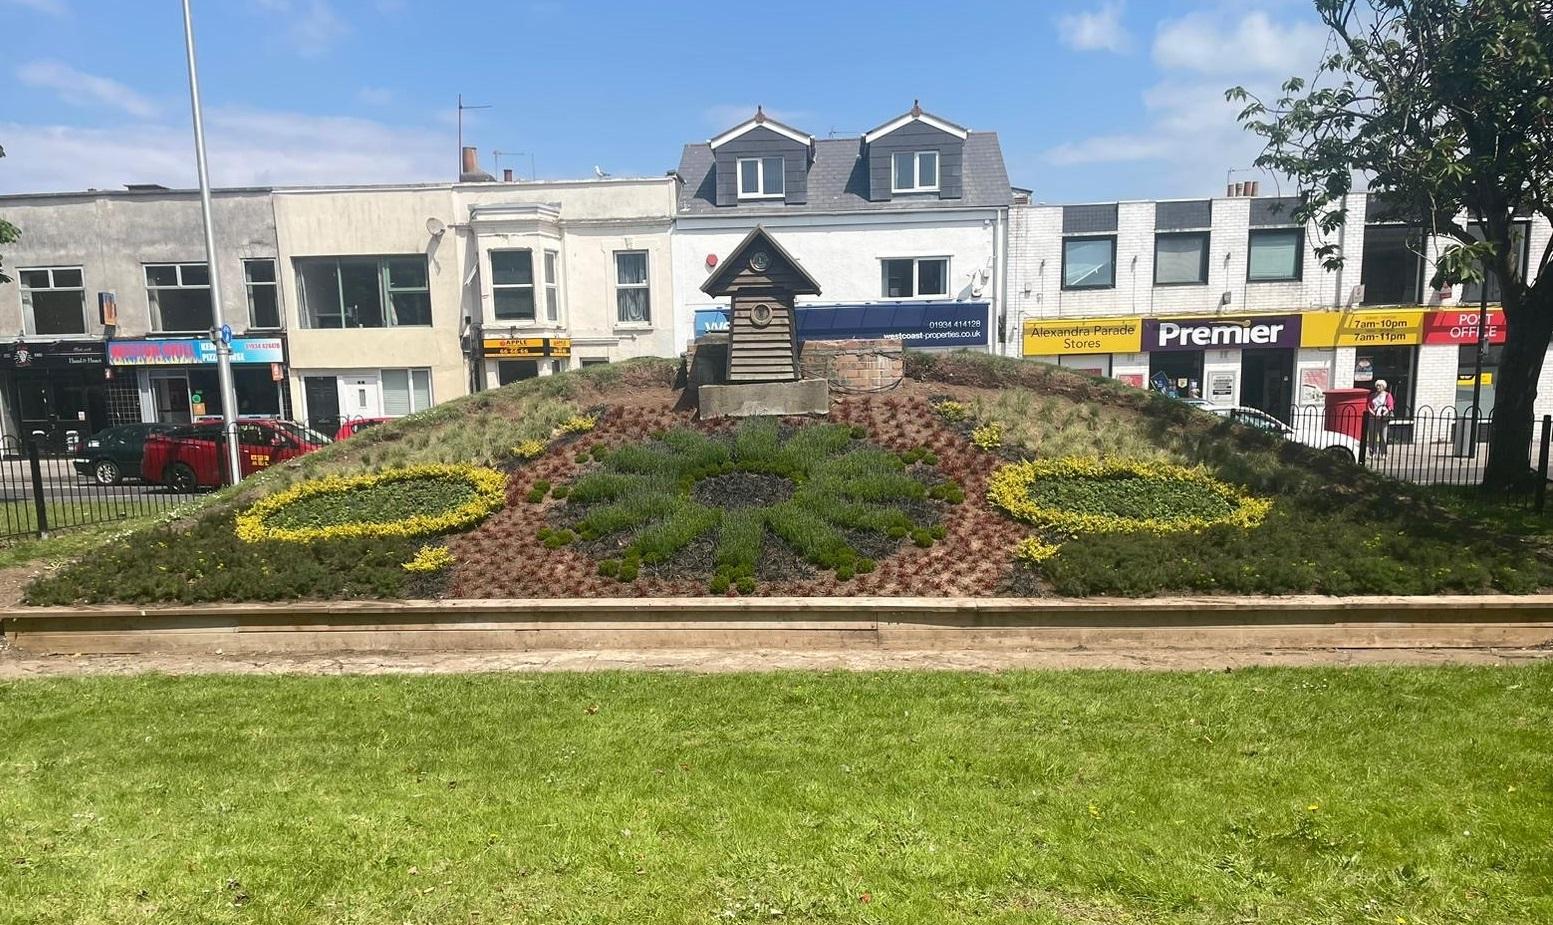 A photo of the floral clock in Weston-super-Mare with RNLI 200th anniversary planting complete taken on 5 June 2024